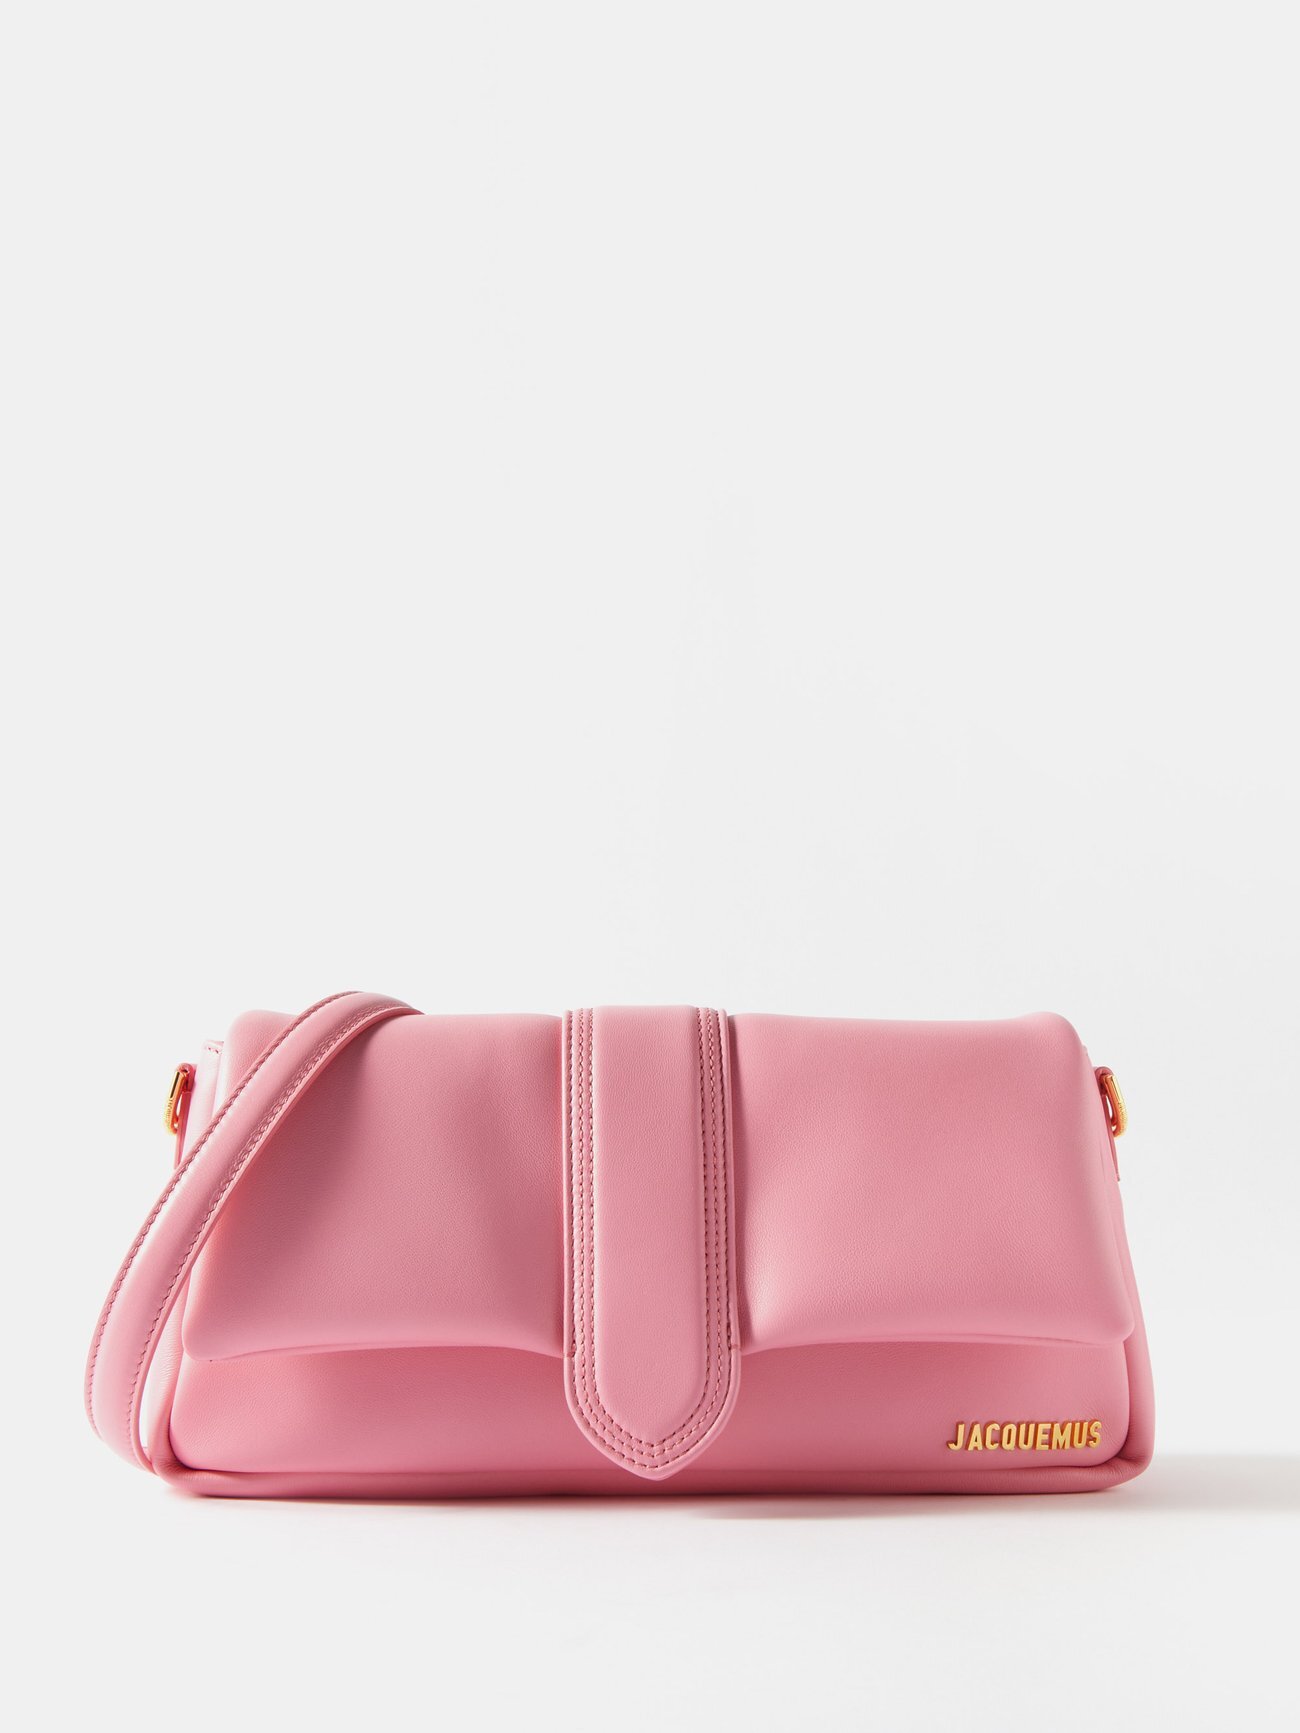 Jacquemus - Bambimou Padded Leather Shoulder Bag - Womens - Light Pink